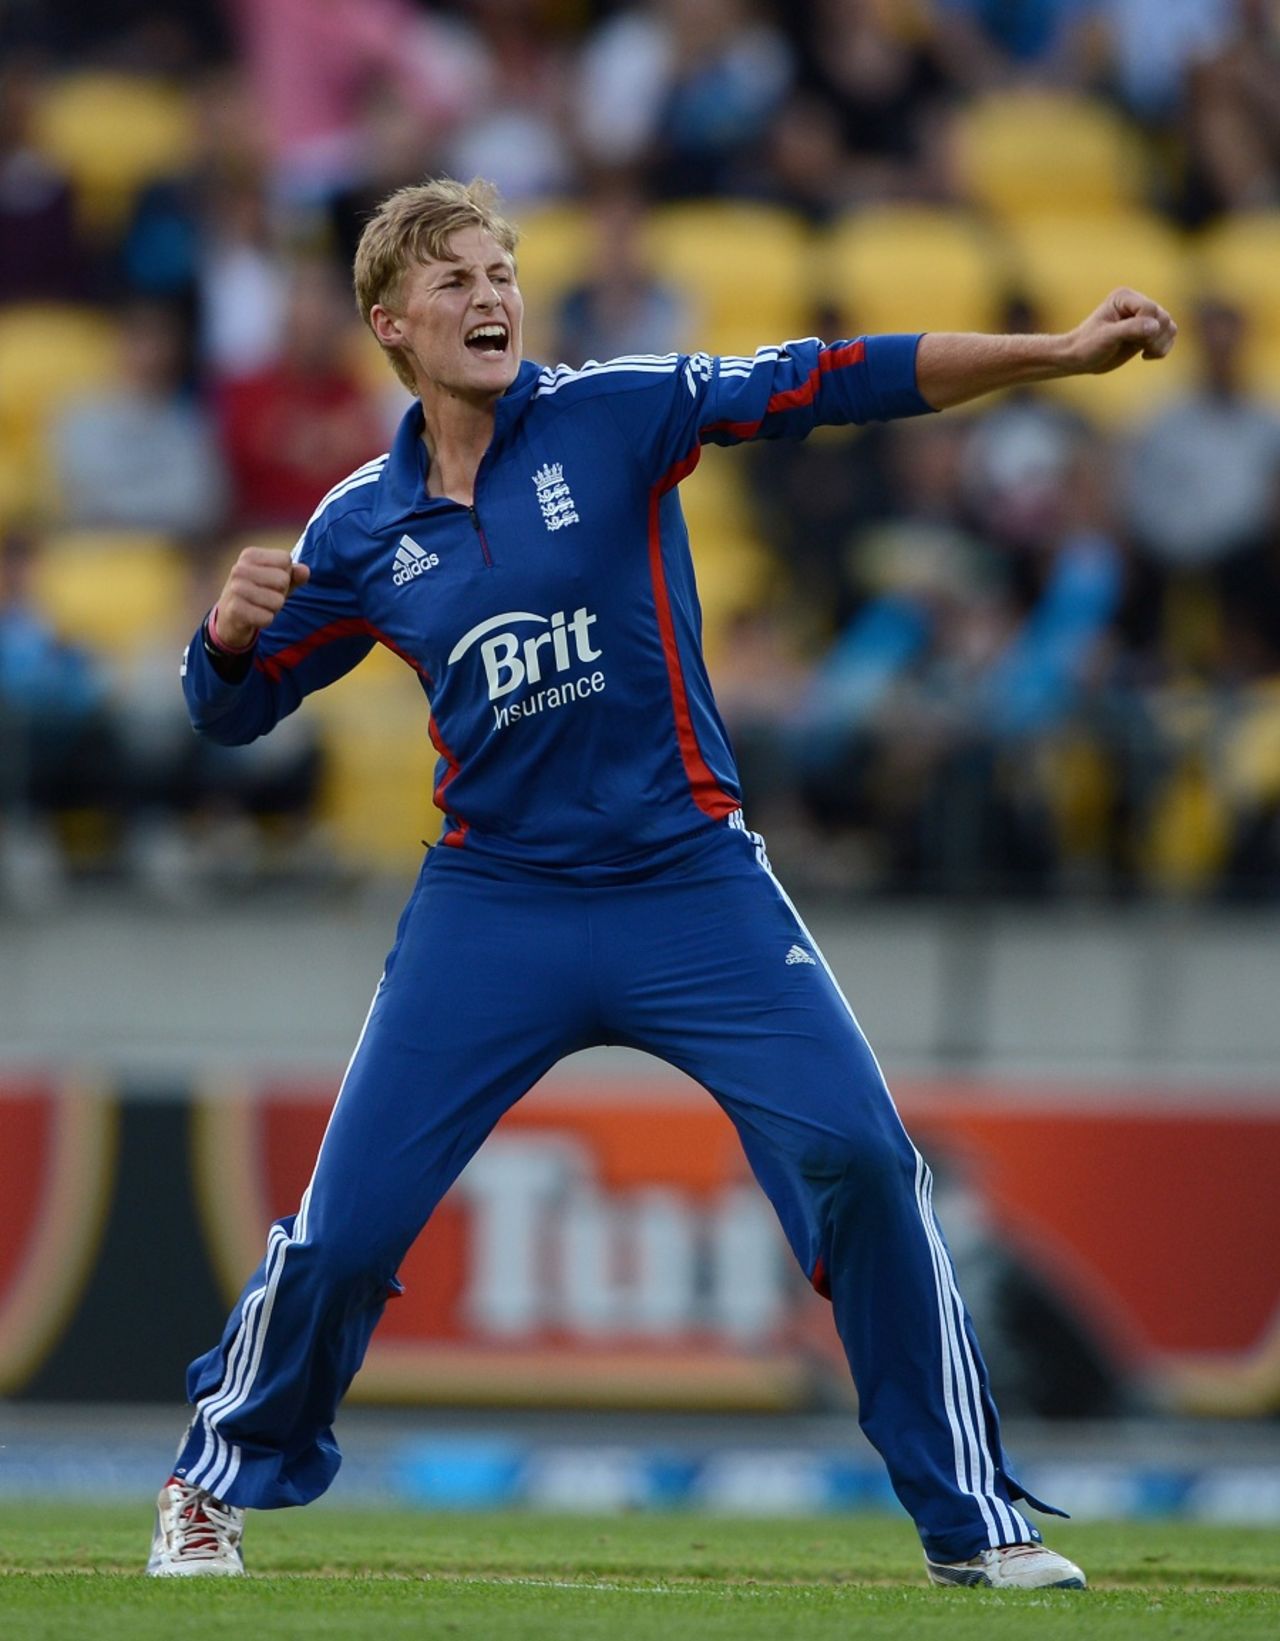 Joe Root celebrates the wicket of Ross Taylor, his first T20 wicket, New Zealand v England, 3rd T20, Wellington, February 15, 2013